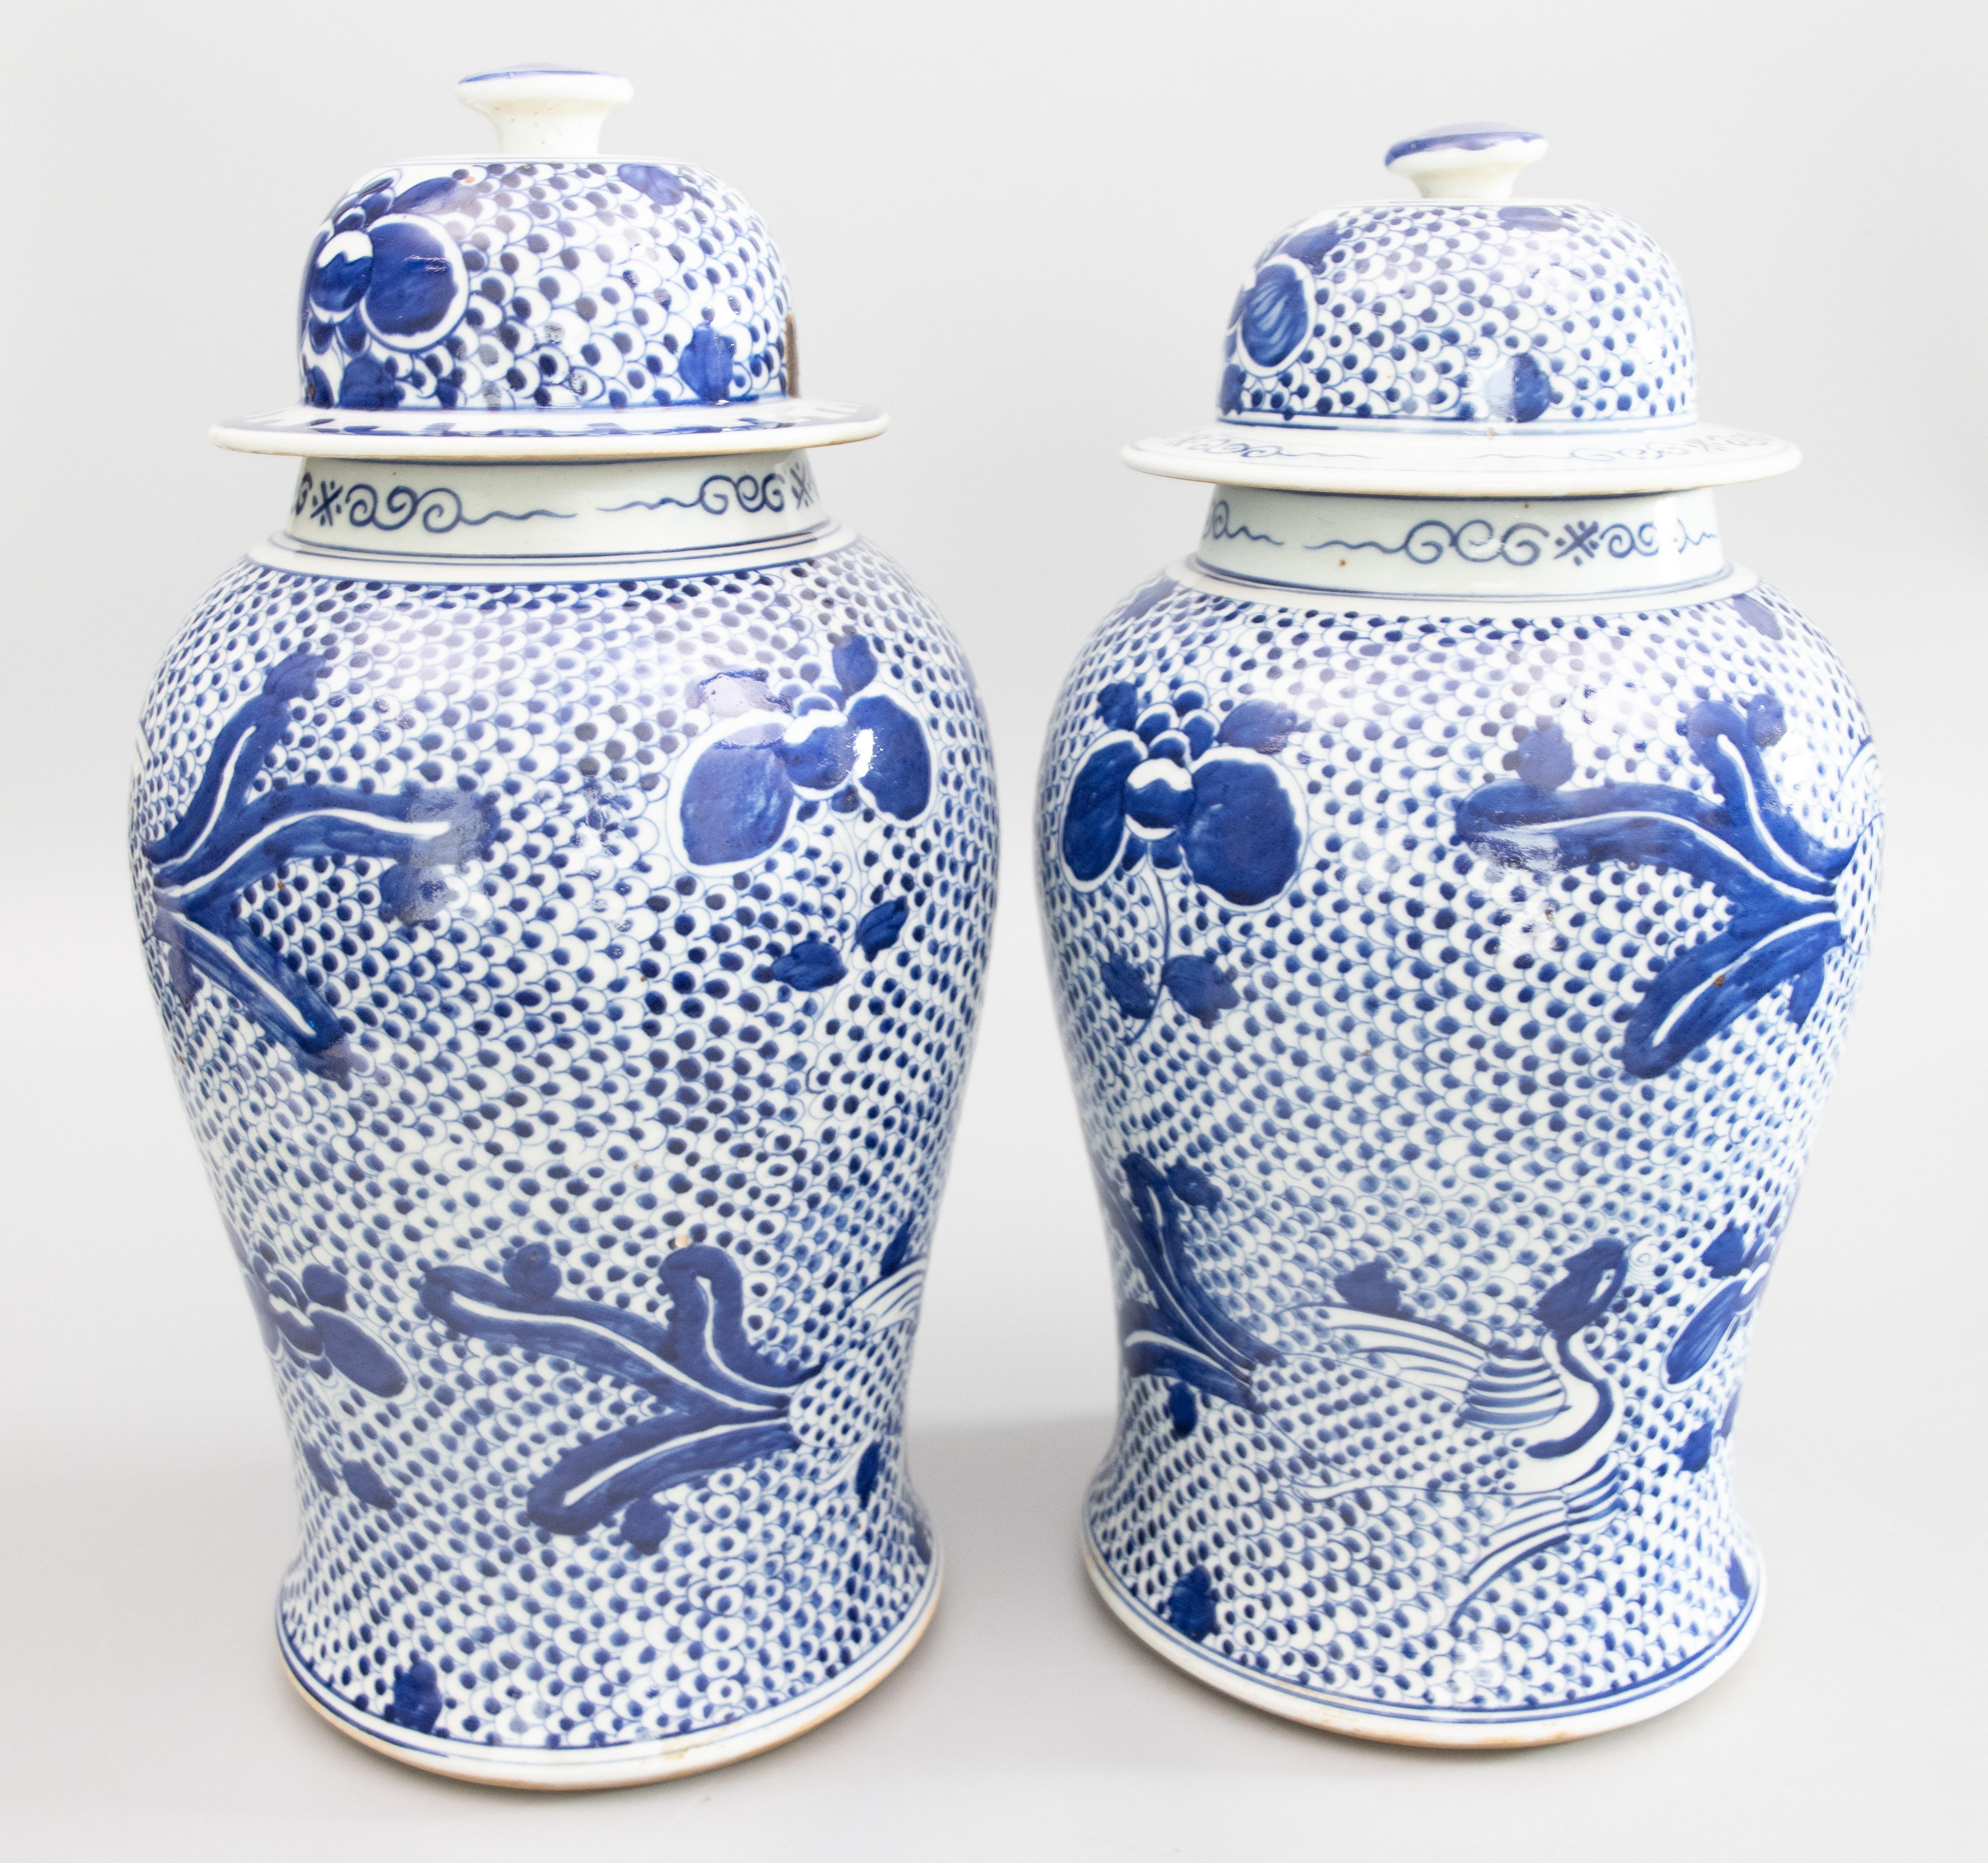 A lovely antique pair of Chinese Kangxi style handmade lidded temple jars or ginger jars. These stunning jars are a nice large size with hand painted phoenix birds and peony flowers over a vibrant cobalt blue and white Balasta pattern. There are